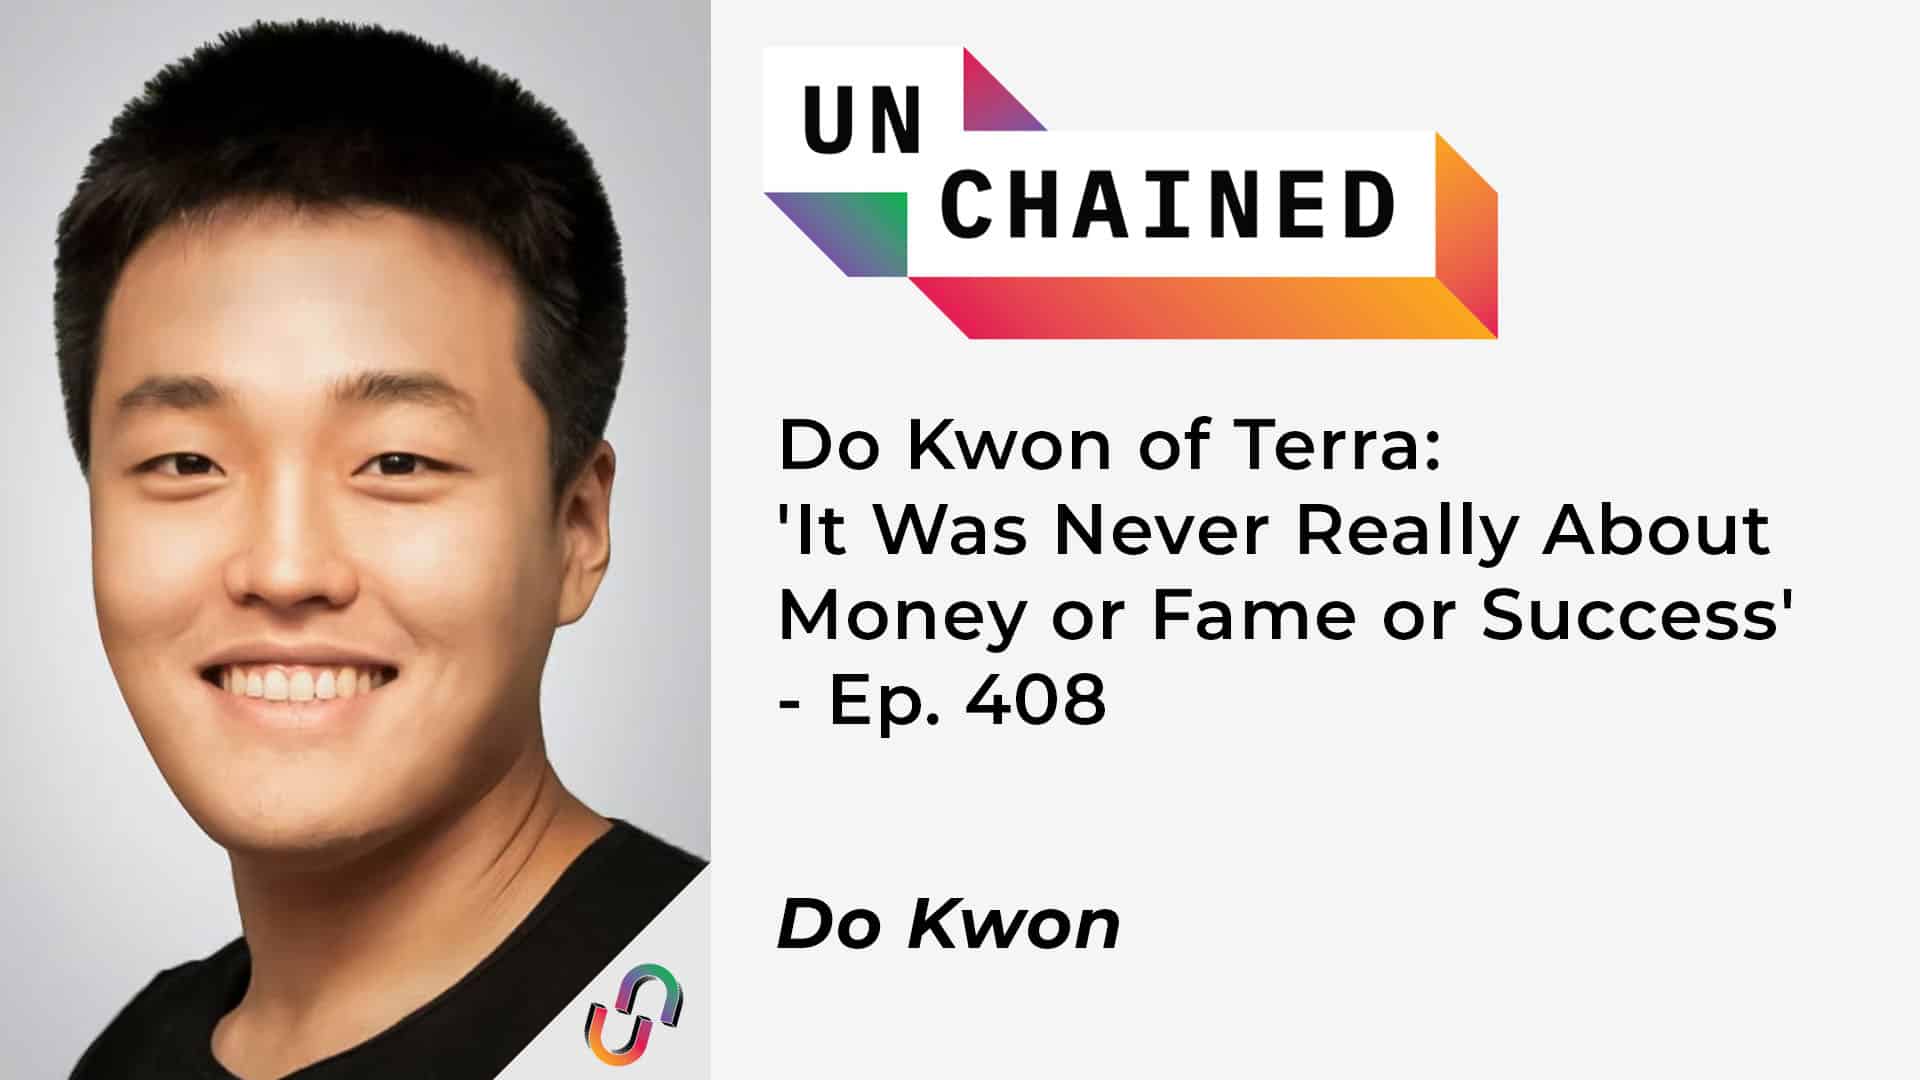 Do Kwon of Terra: 'It Was Never Really About Money or Fame or Success' - Ep. 408